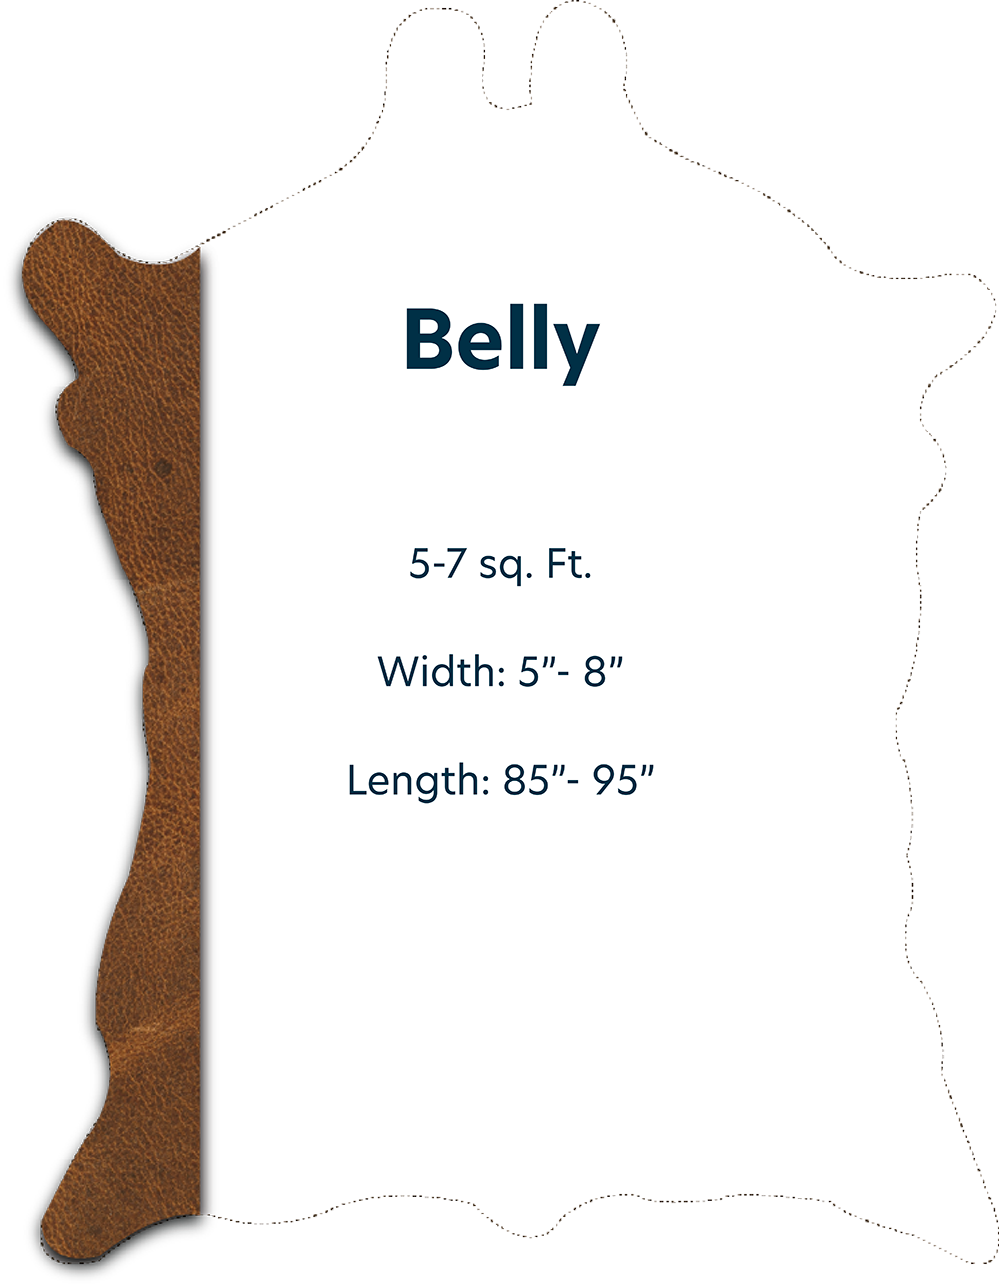 Belly with Dimensions